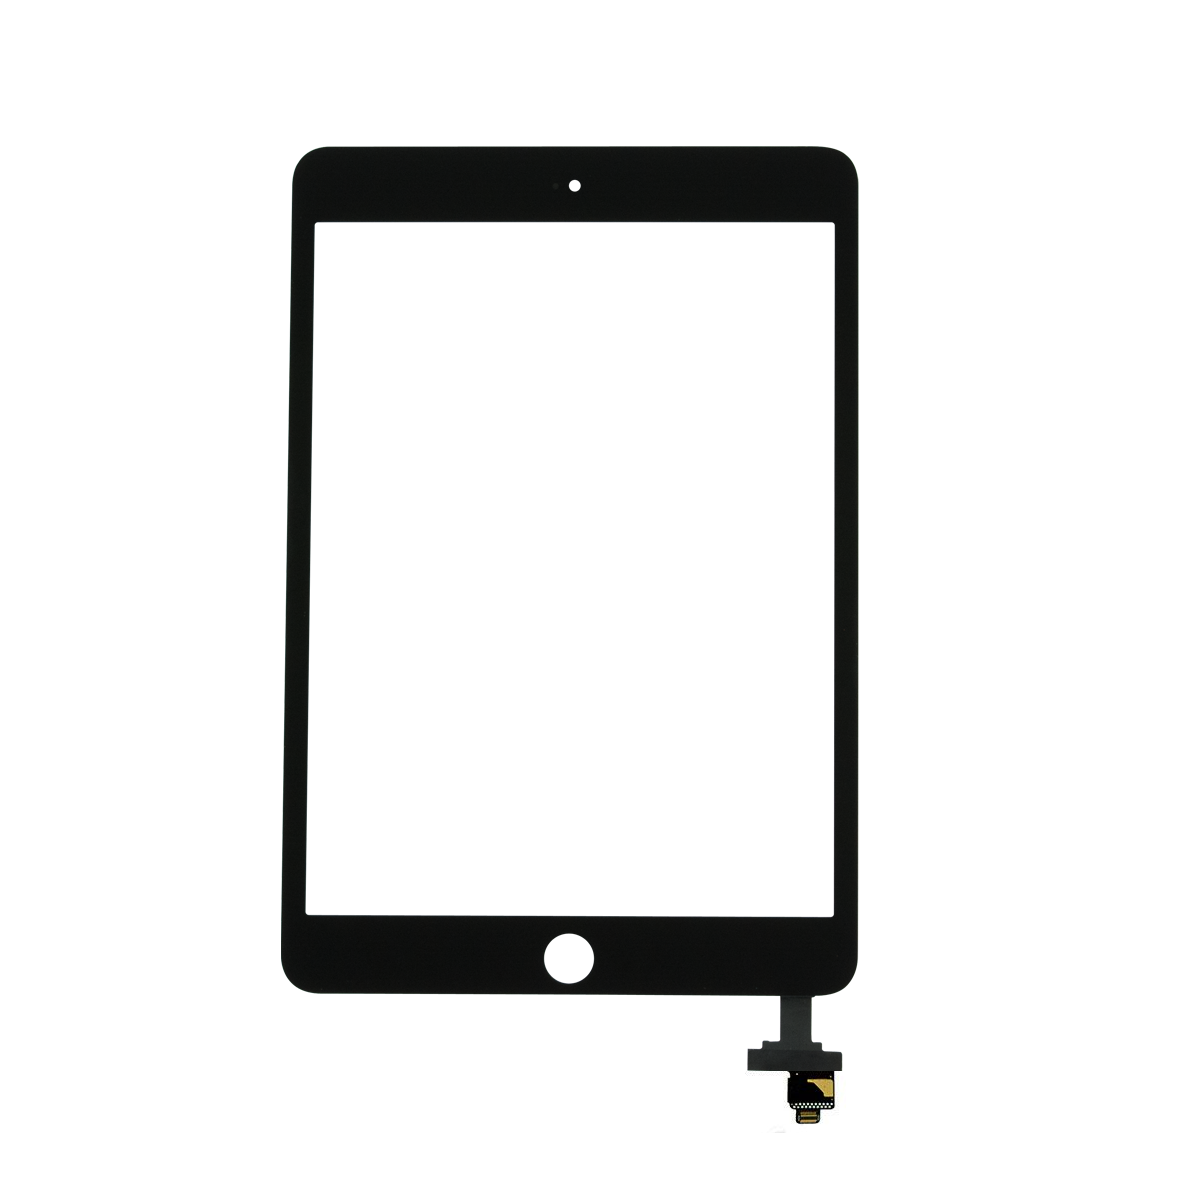 Apple iPad Mini 3 Replacement Touch Screen Assembly - Black for [product_price] - First Help Tech